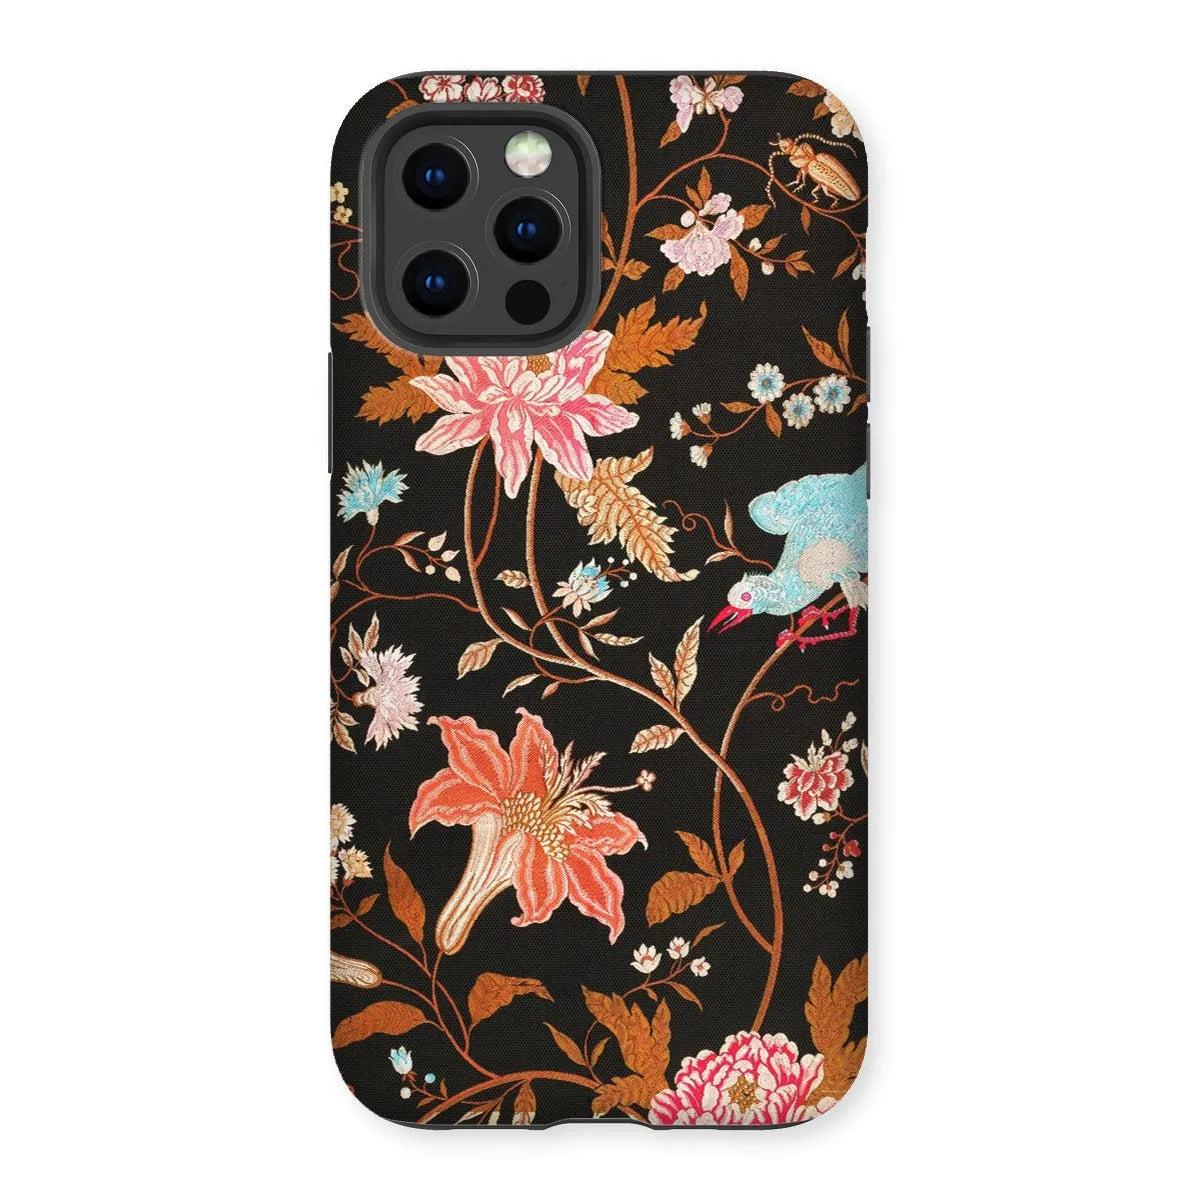 Midnight Call - Indian Aesthetic Fabric Art Phone Case - Iphone 12 Pro / Matte - Mobile Phone Cases - Aesthetic Art